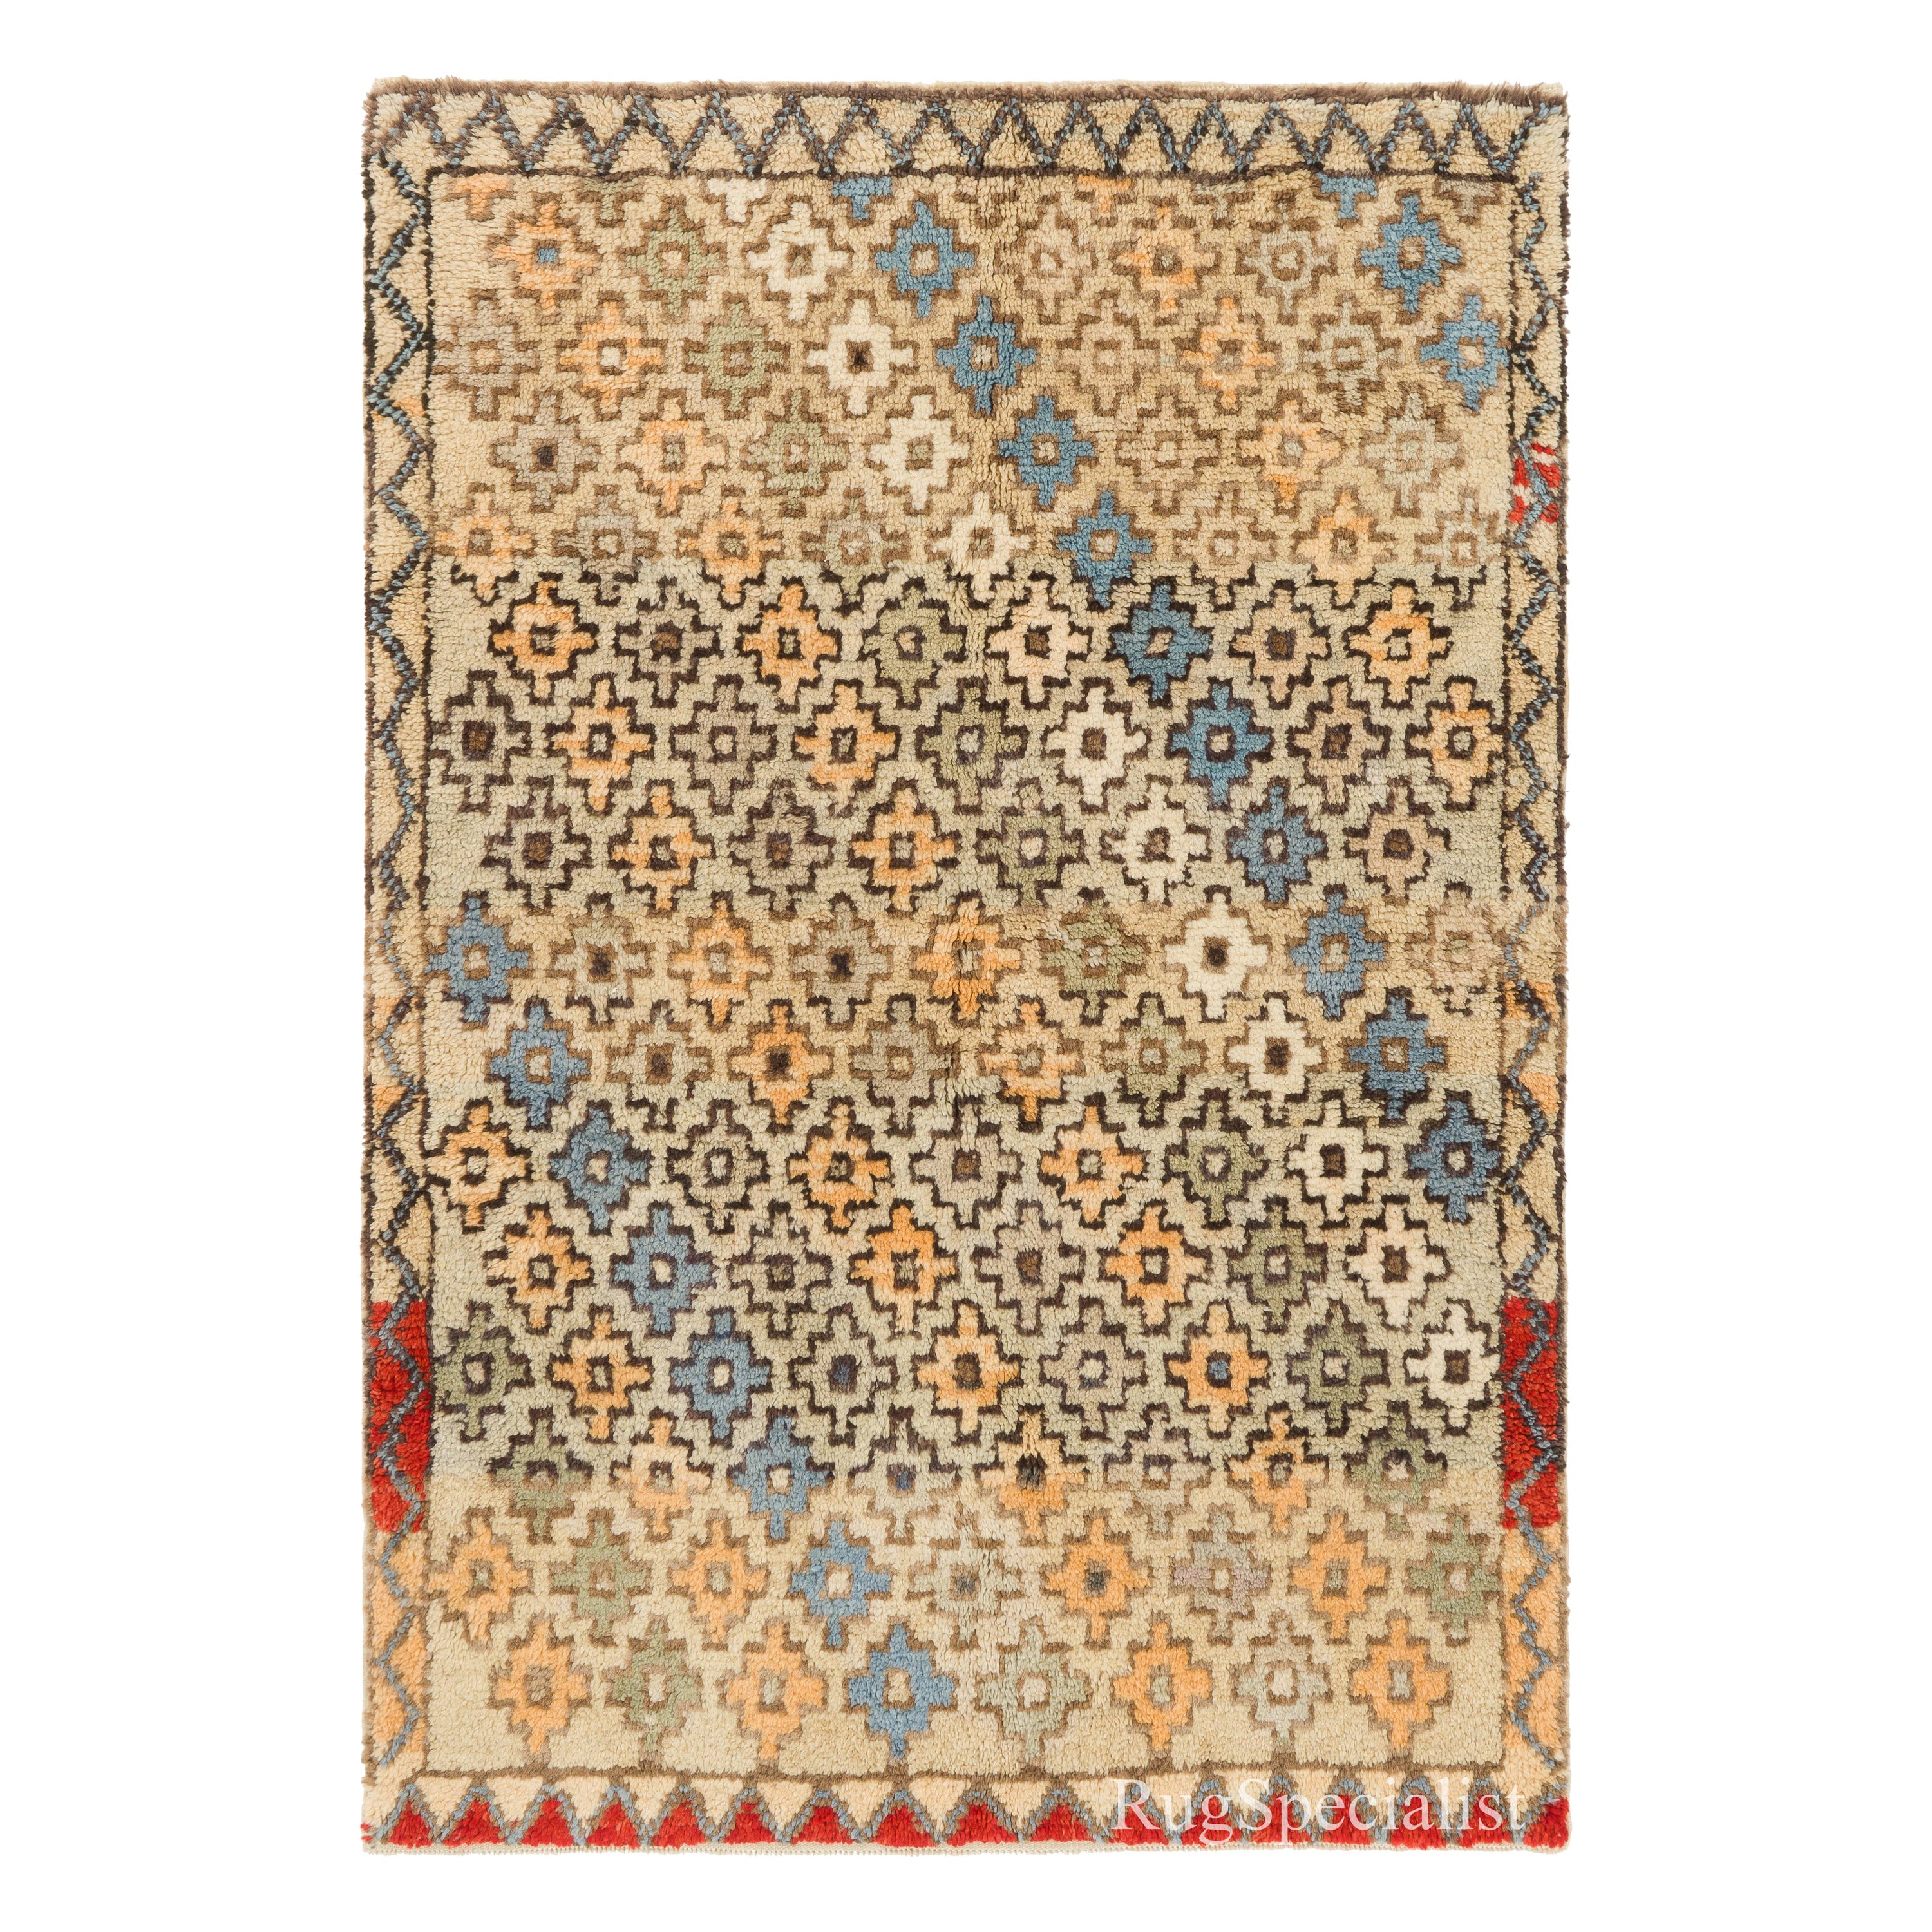 Hand Knotted Tulu Rug in Muted Colors with Overall Stylized Floral Heads Pattern